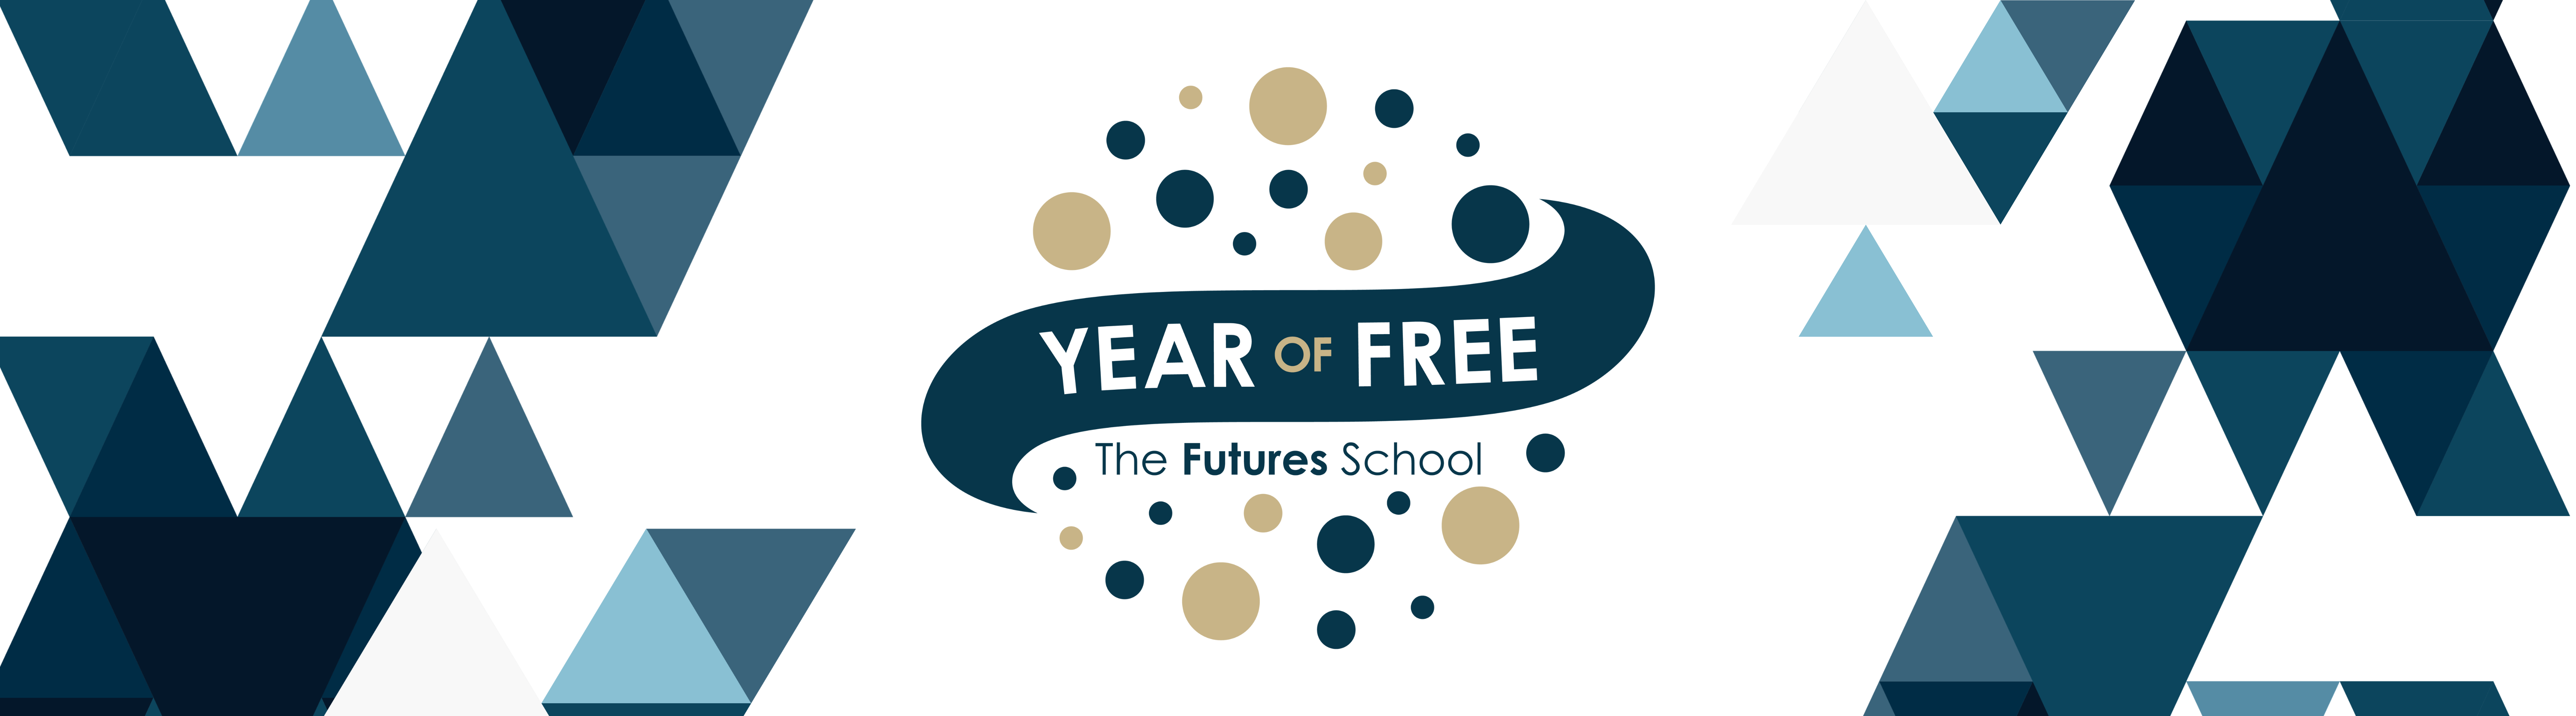 Year of Free: The Futures School